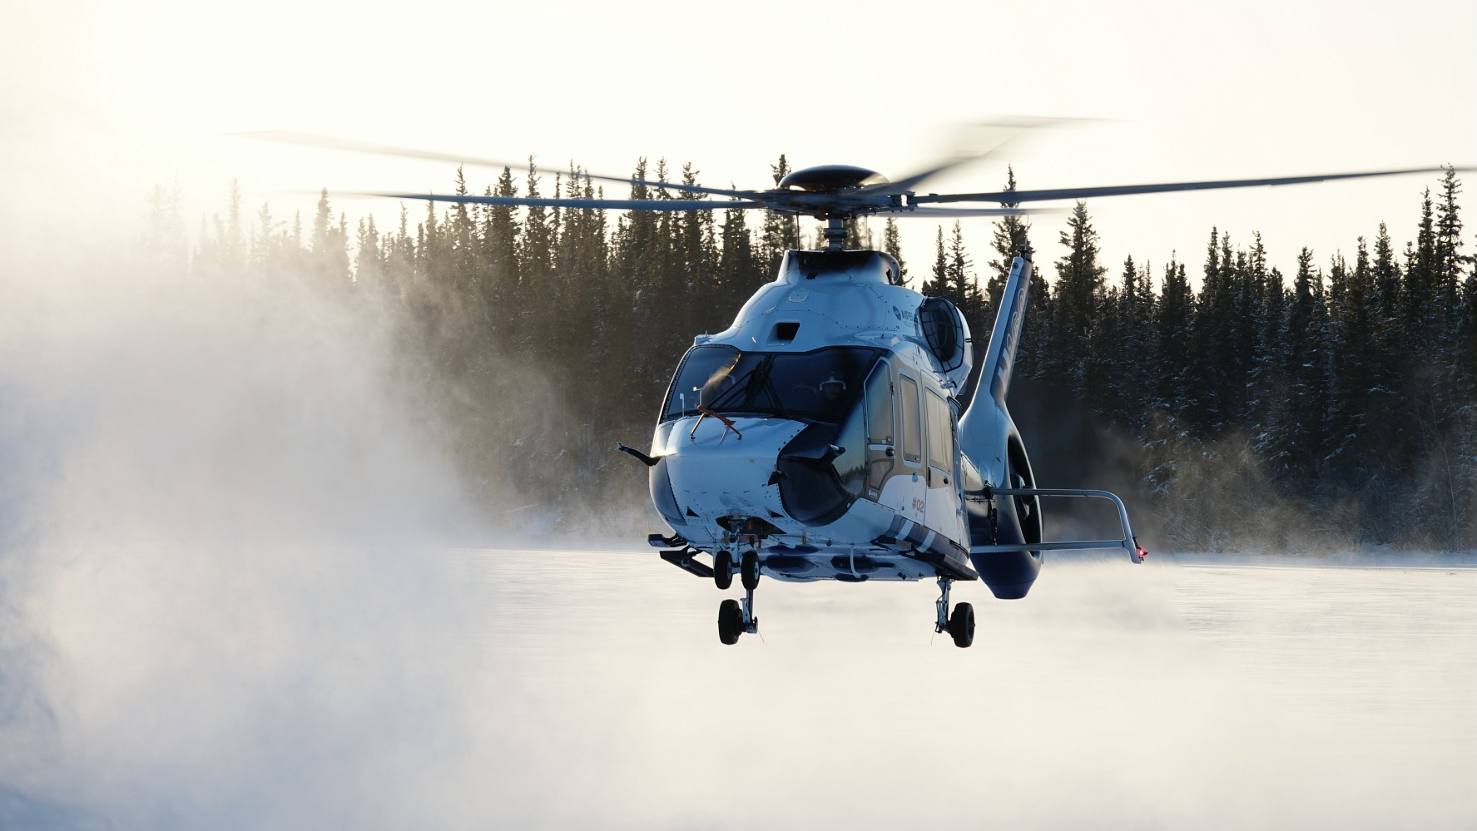 Airbus Helicopters hopes to announce first H160 customer this year